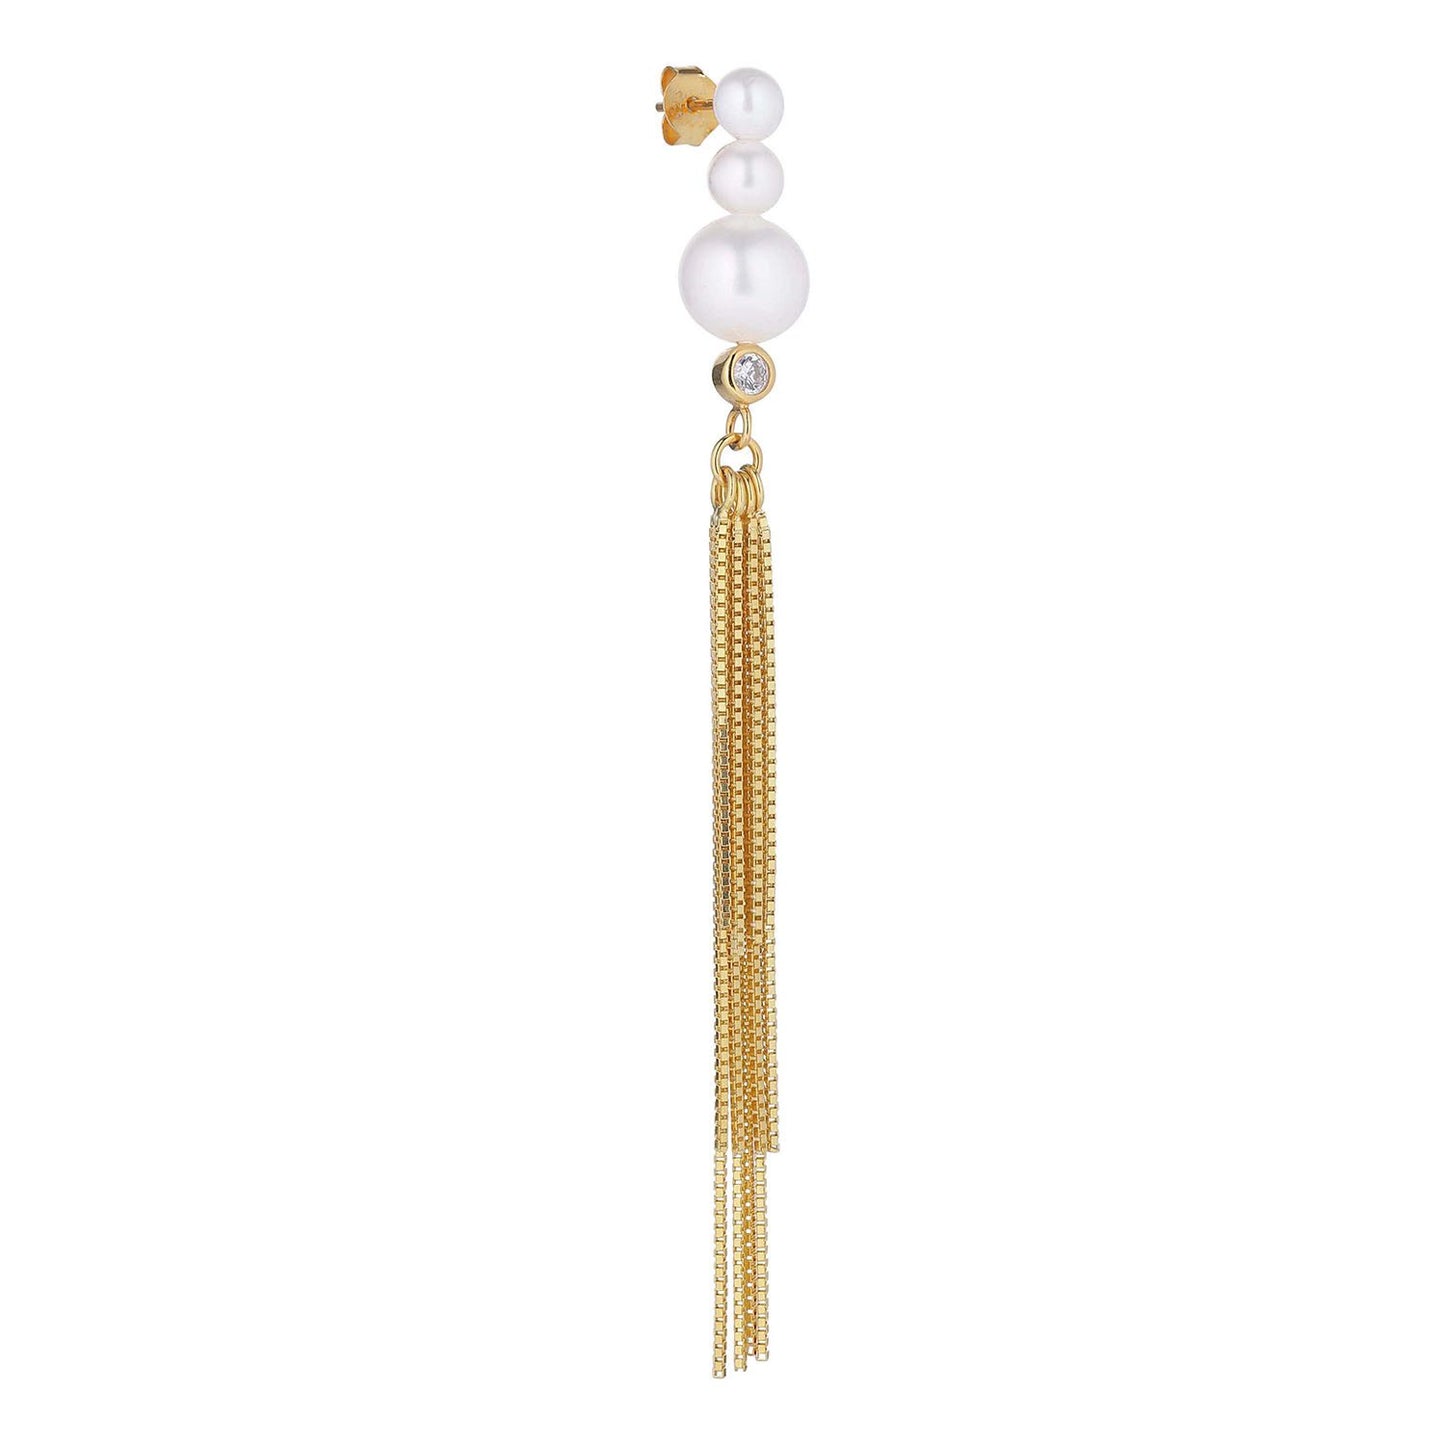 Baila Stud Small Earring -  Gold Plated Silver White Freshwater Pearls, Cubic zirconias